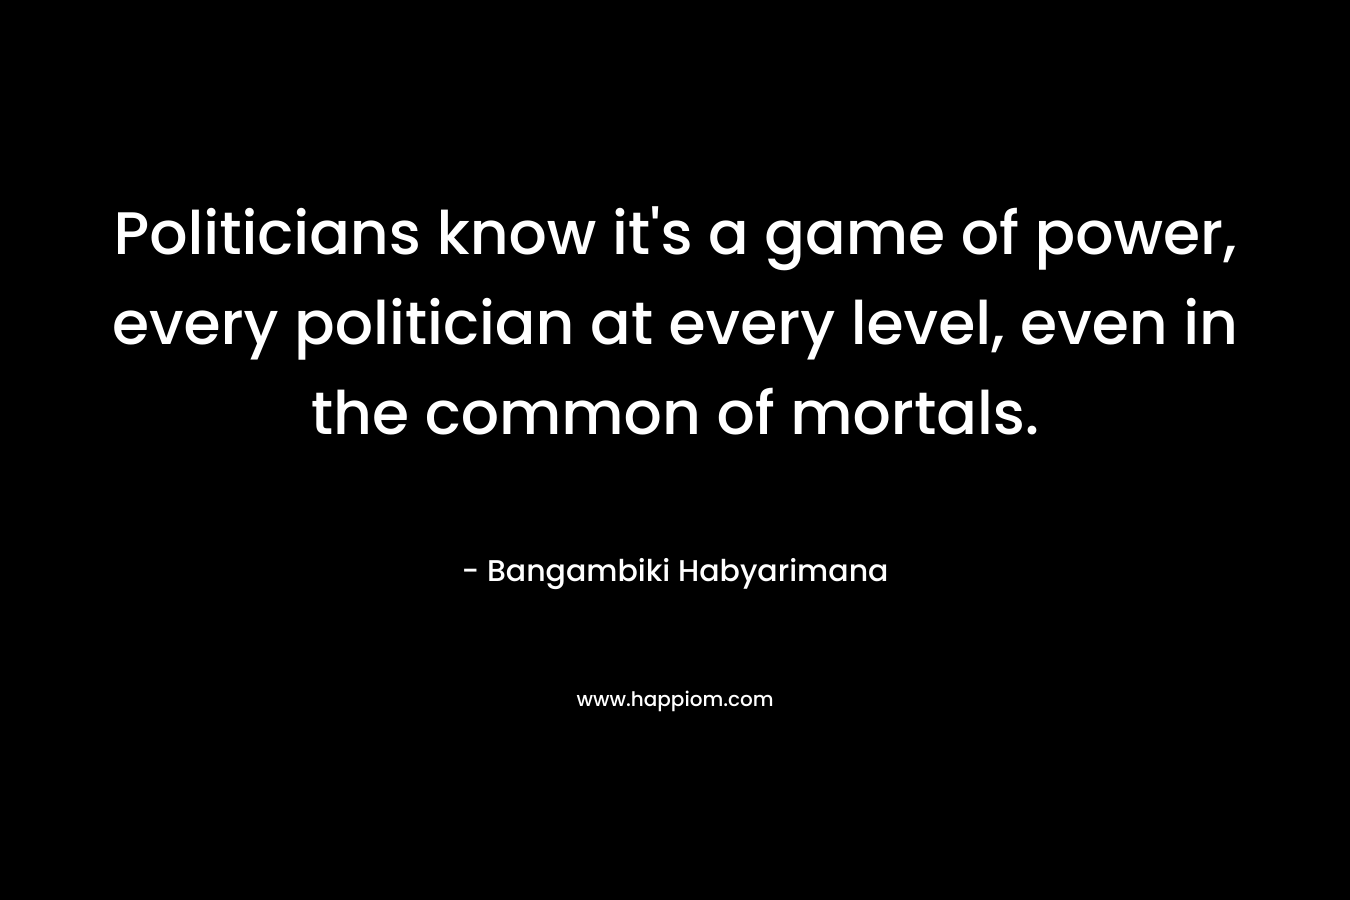 Politicians know it's a game of power, every politician at every level, even in the common of mortals.